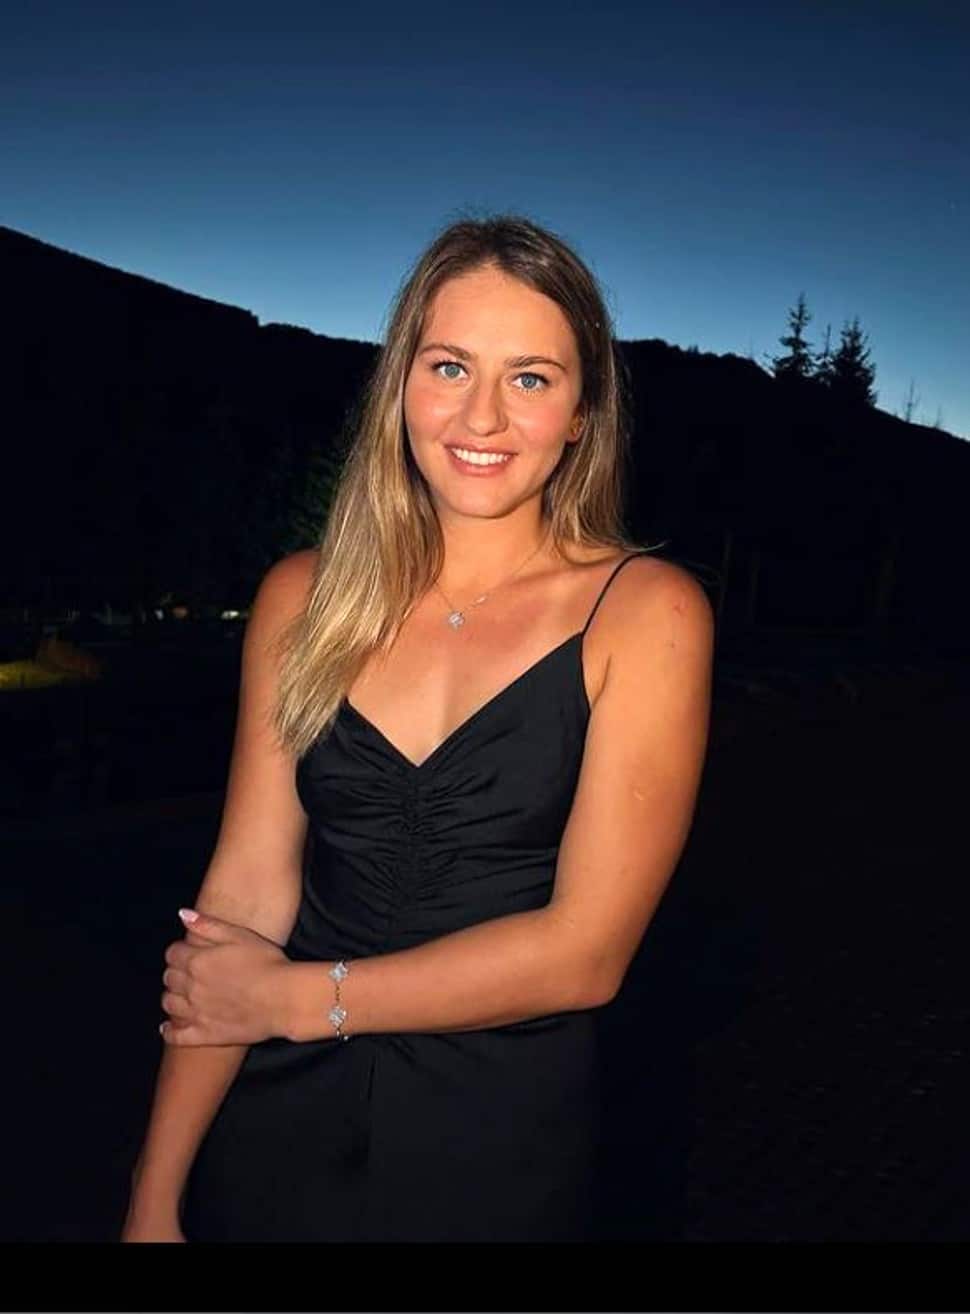 In 2018, Marta Kostyuk became the youngest player to win a match at the Australian Open in 22 years. The 15-year-old qualifier became the first player born in 2002 to win in the main draw of a Grand Slam when she shocked 25th seed Peng Shuai of China in straight sets. (Source: Instagram)